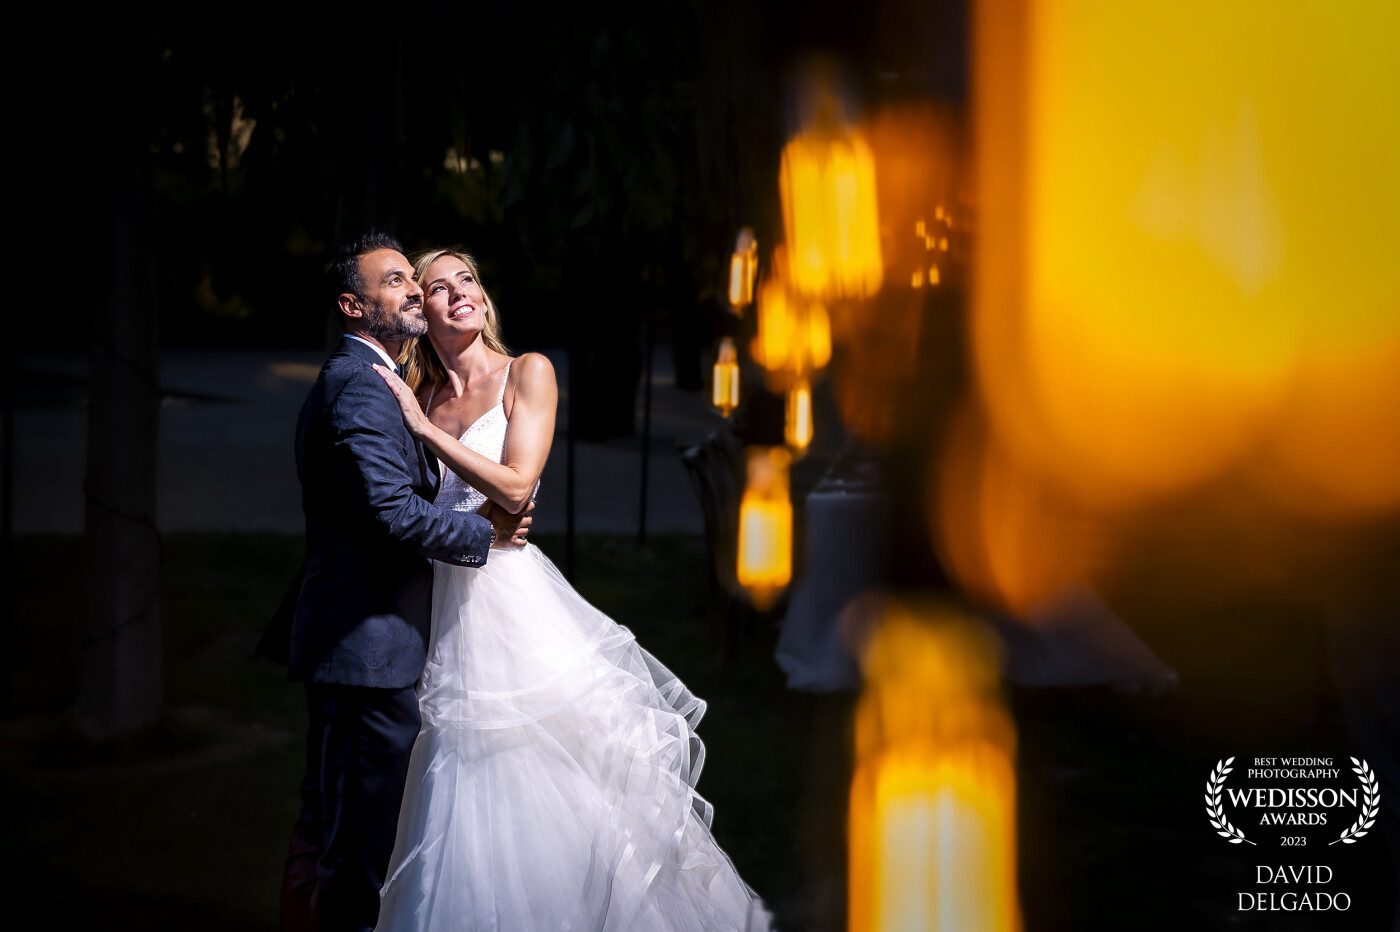 Candle Light - Ester and David decided to celebrate their wedding day on a beautiful summer afternoon at the idyllic Palau de Margalef estate with family and friends. It is always an honor to photograph the wedding report for a couple of friends